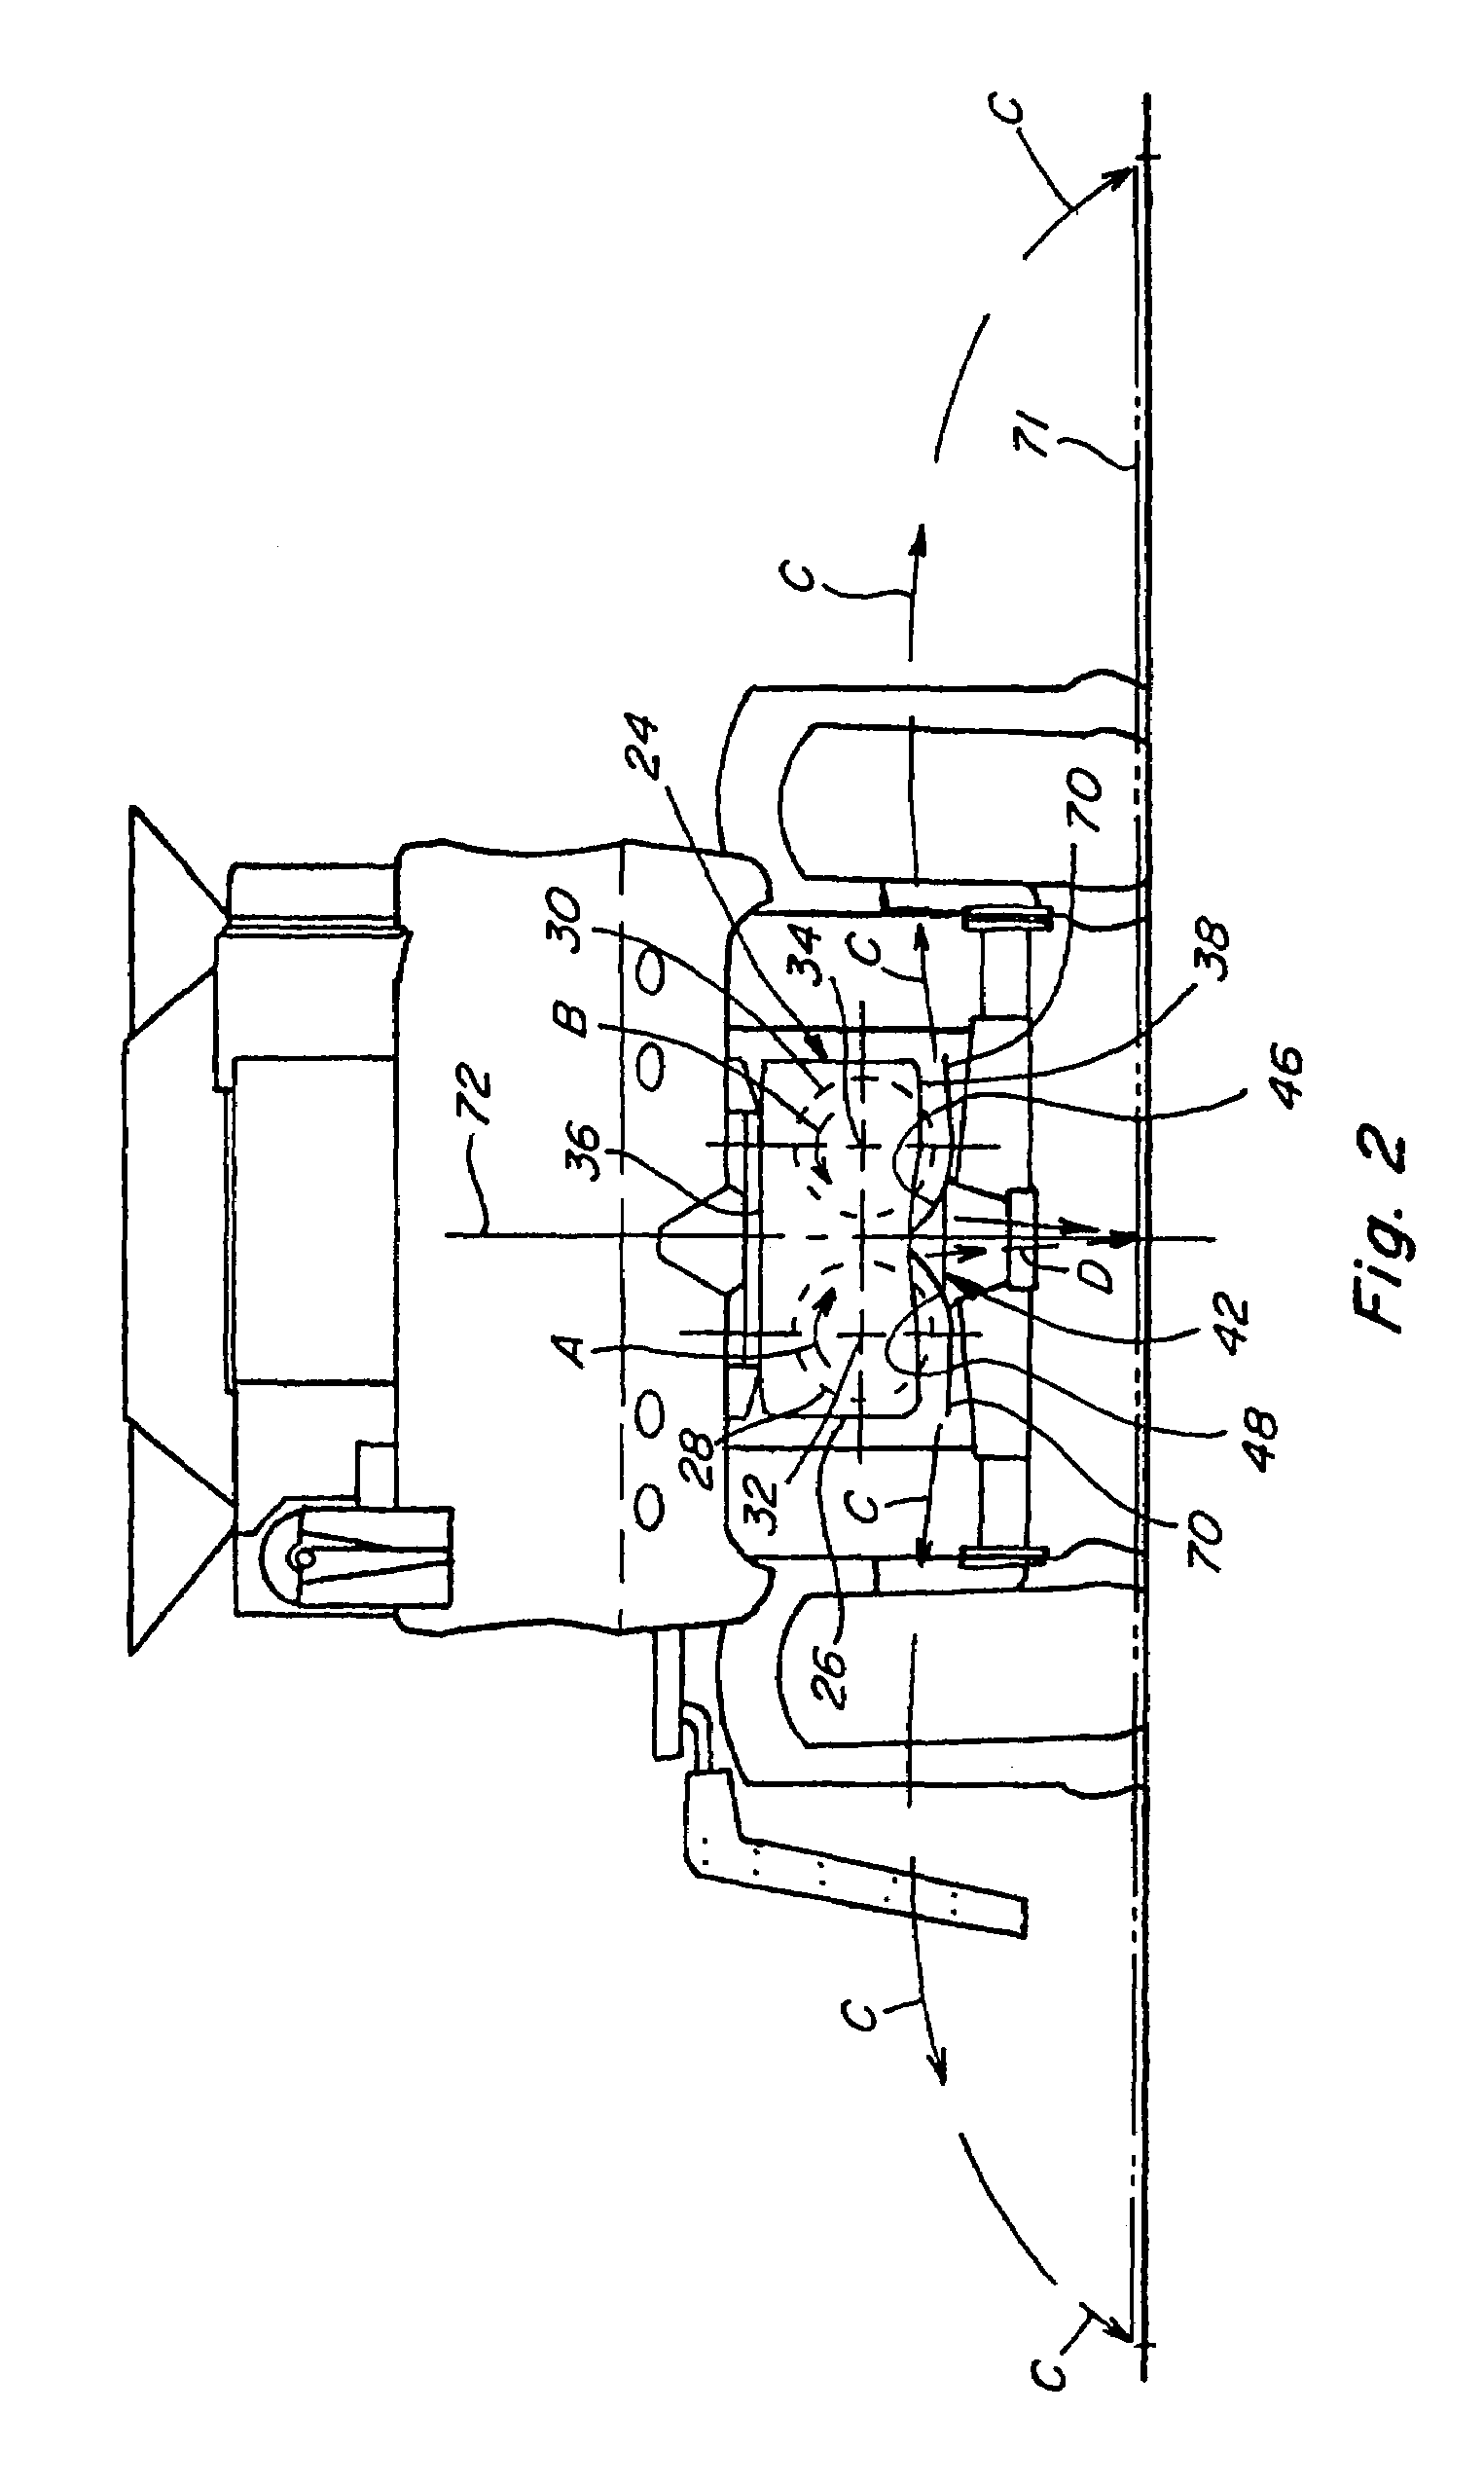 Flow distributor apparatus for controlling spread width of a straw spreader